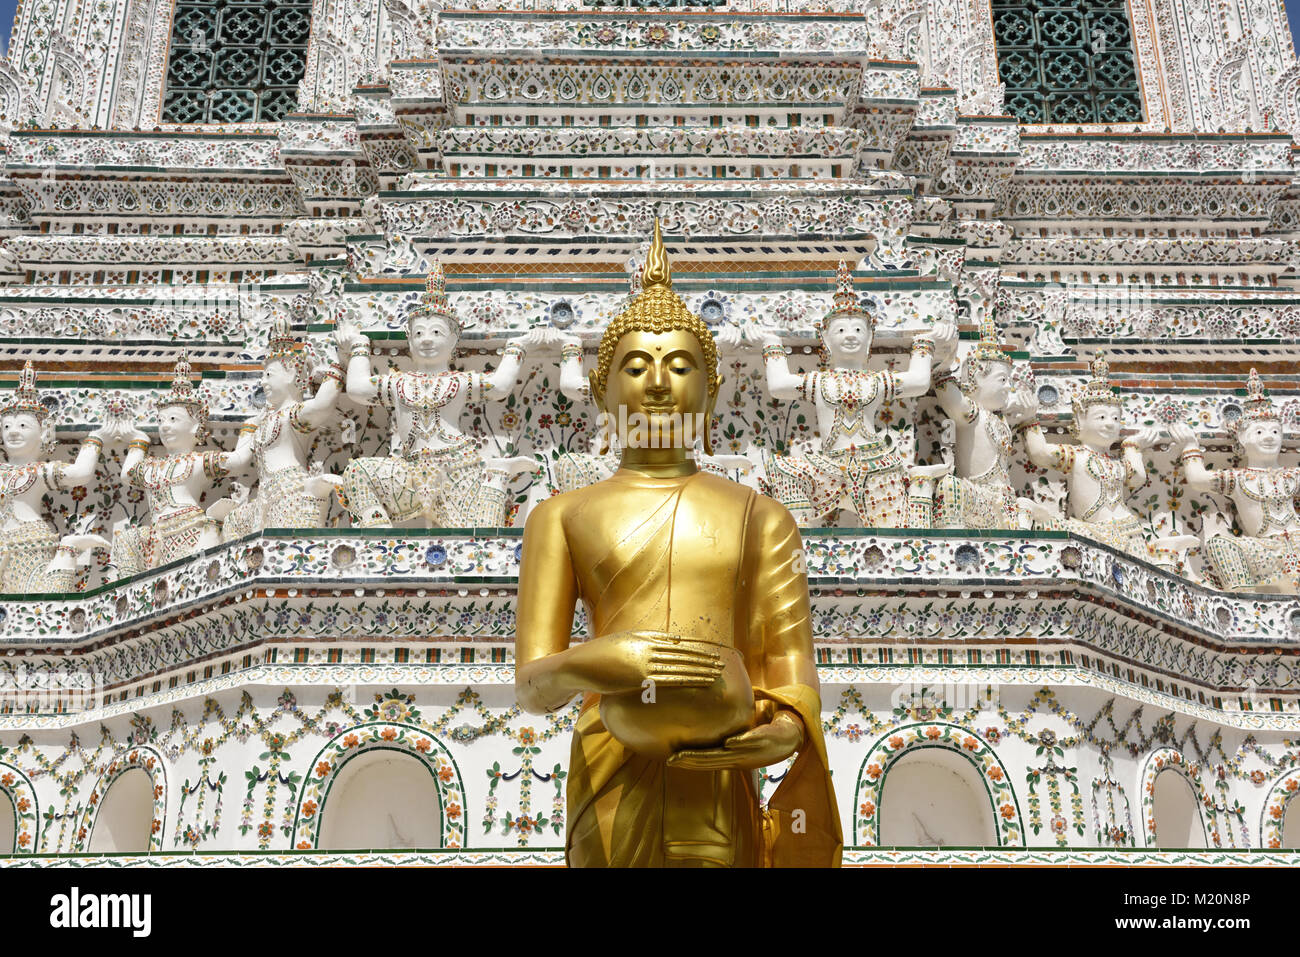 Statue of the Buddha in the grounds of Wat Arun, Bangkok, Thailand Stock Photo